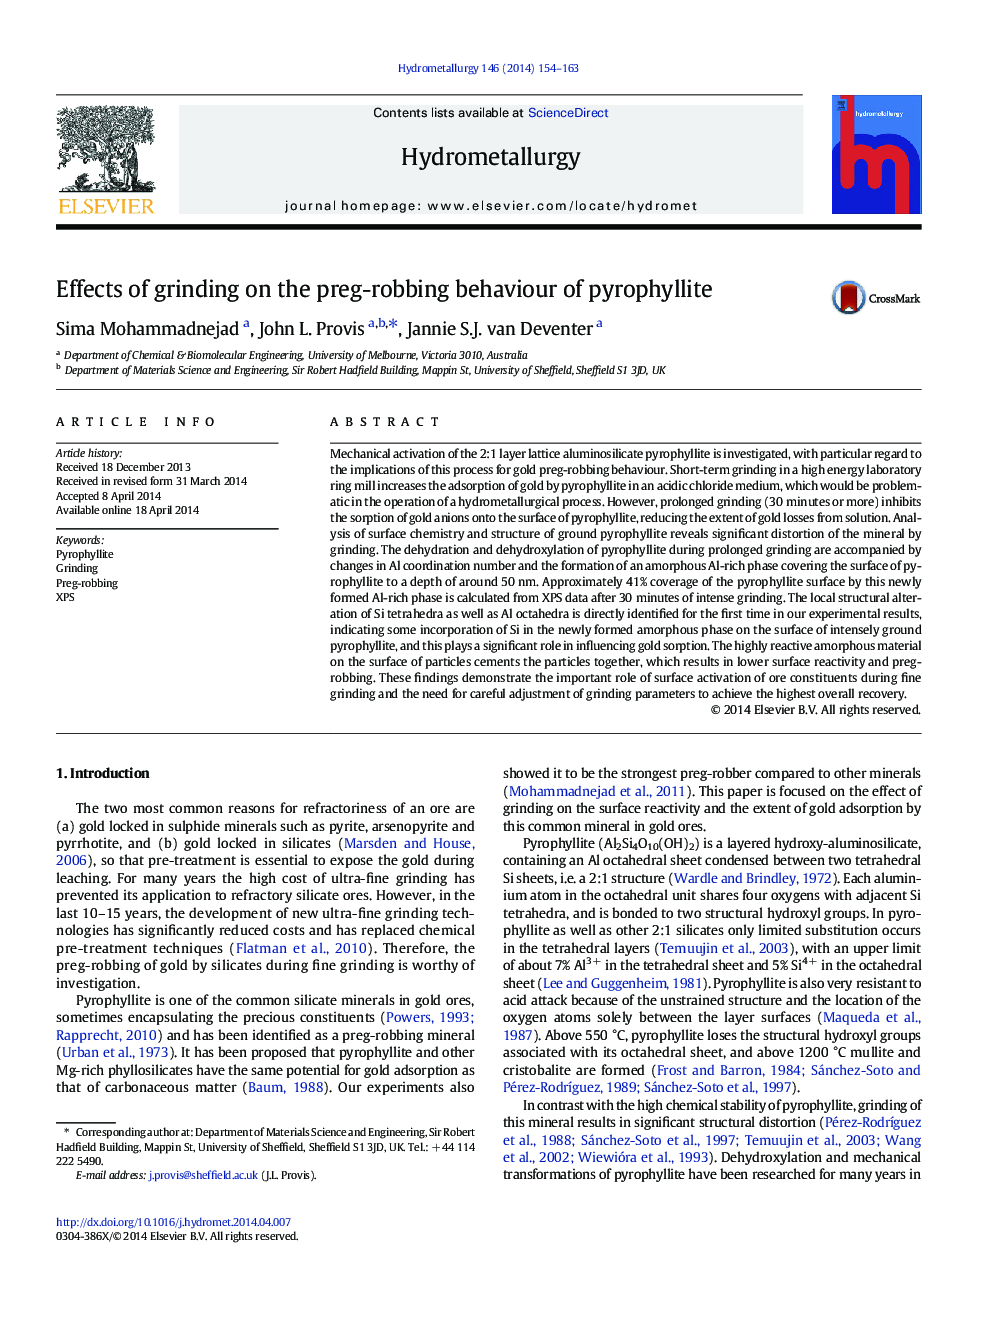 Effects of grinding on the preg-robbing behaviour of pyrophyllite